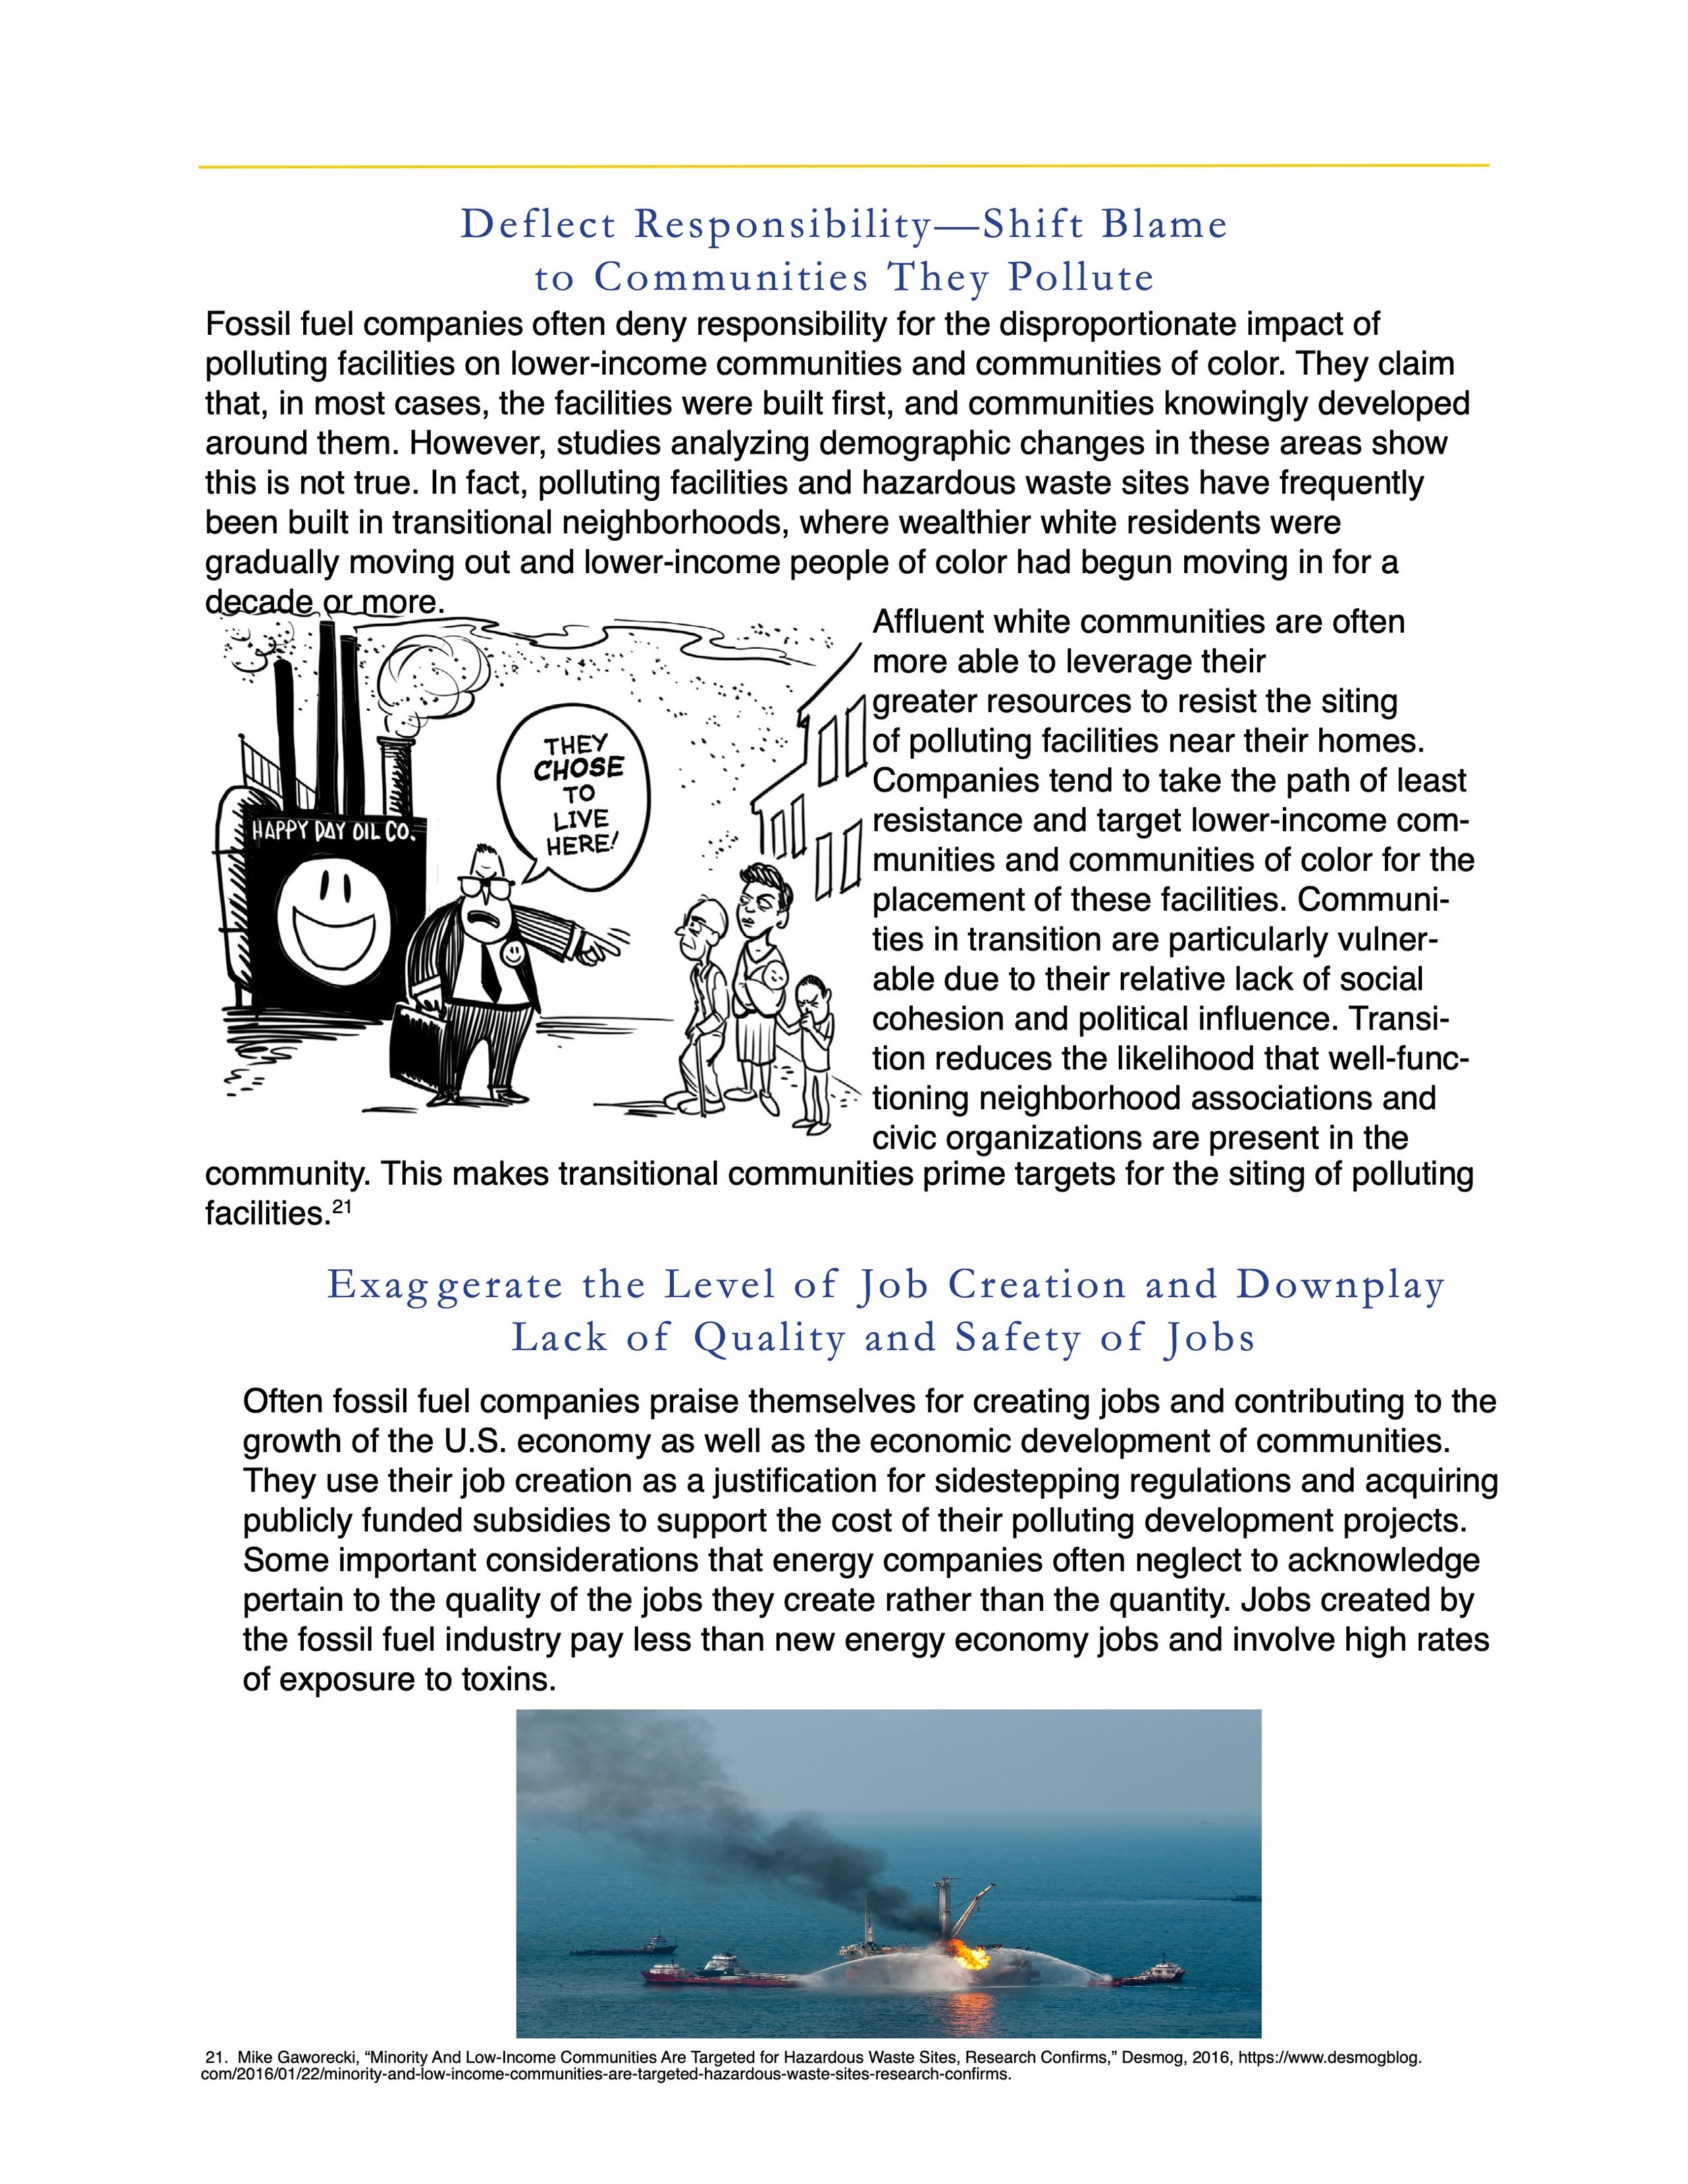 Fossil-Fueled-Foolery-An-Illustrated-Primer-on-the-Top-10-Manipulation-Tactics-of-the-Fossil-Fuel-Industry 10.jpeg